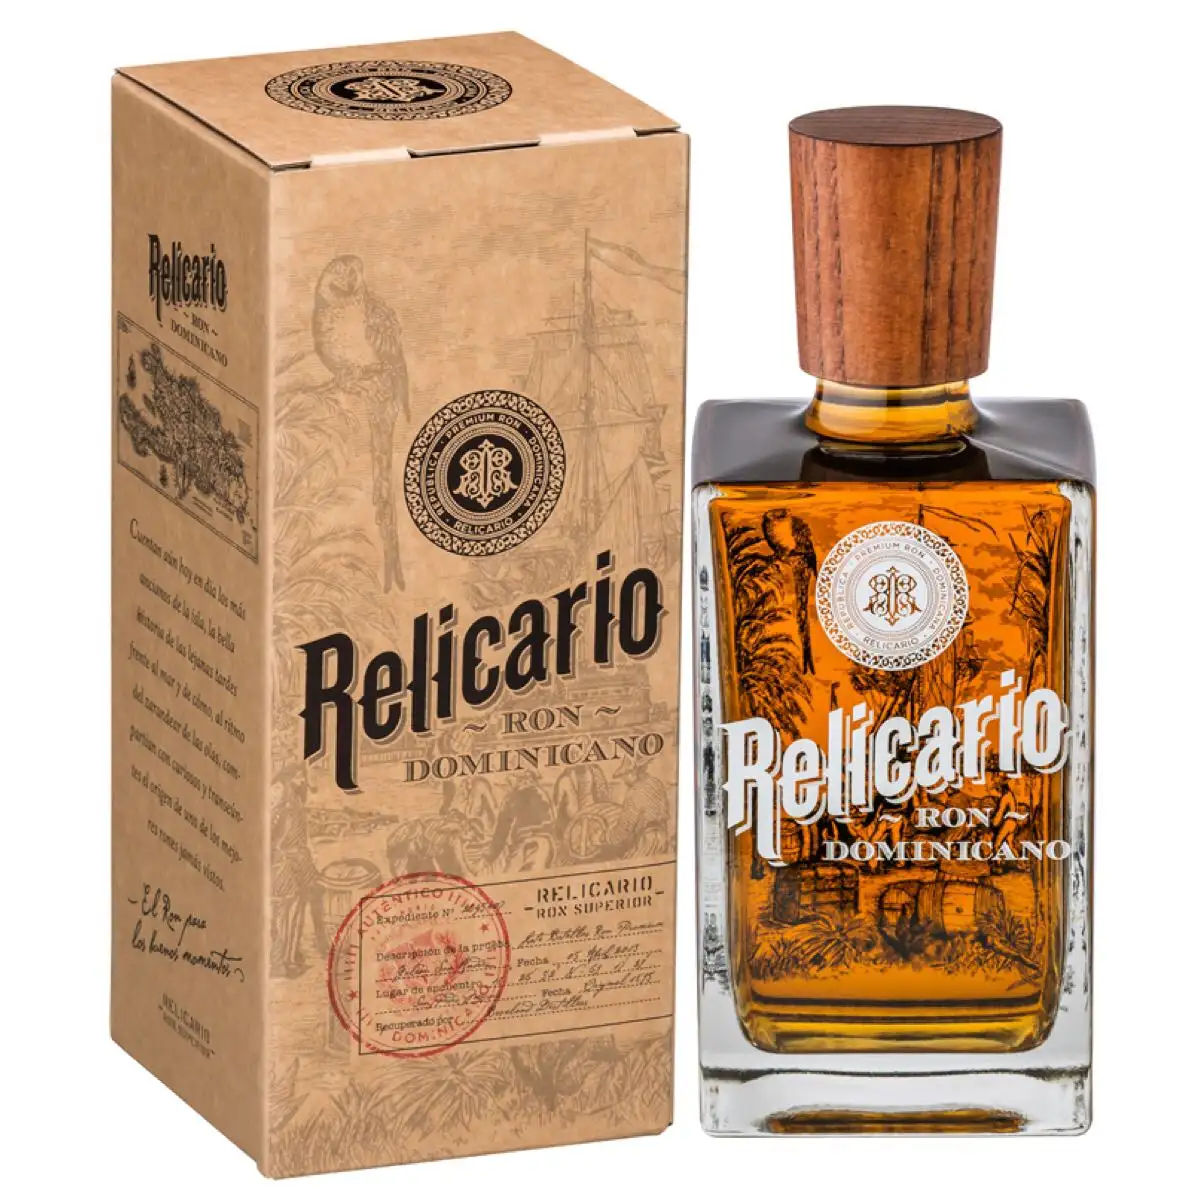 Image of the front of the bottle of the rum Relicario Superior